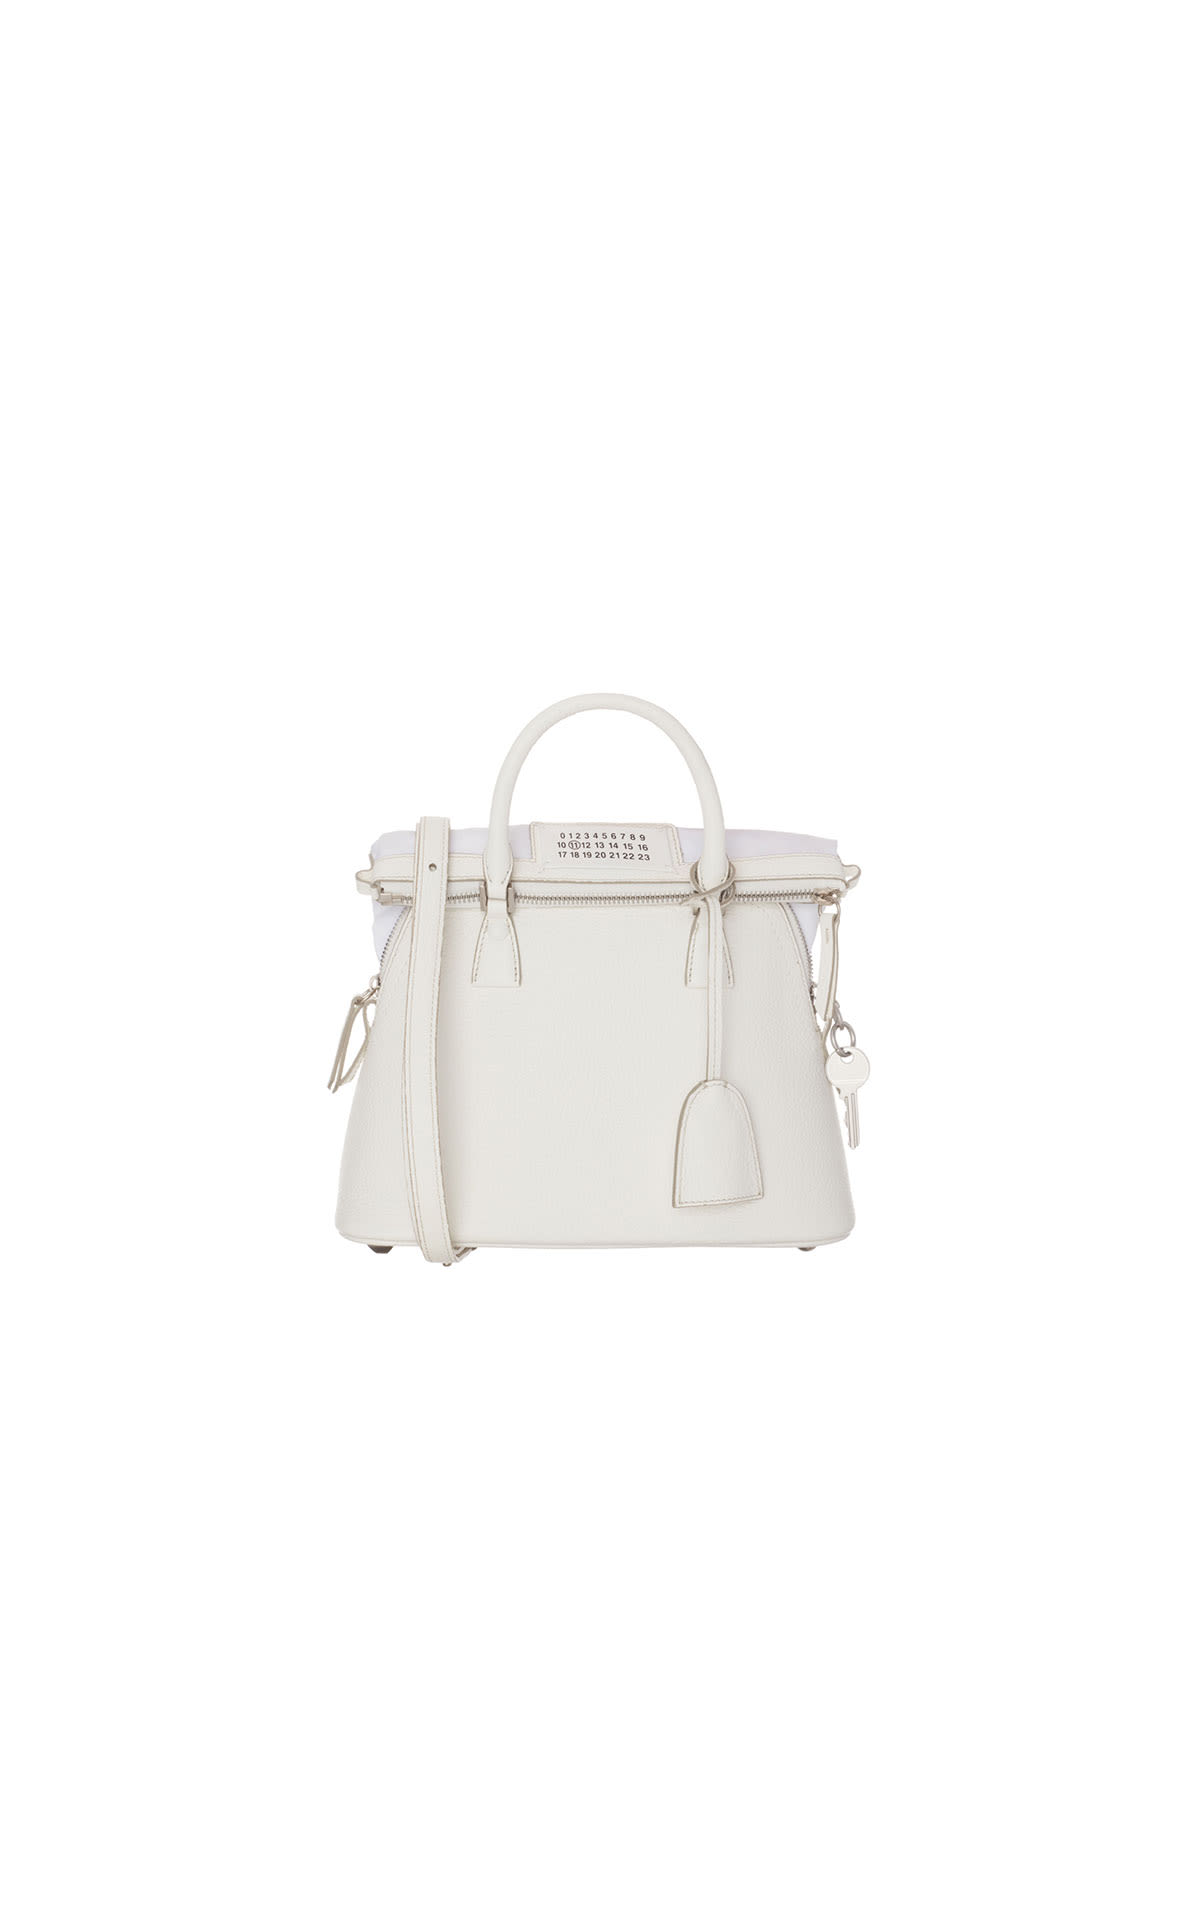 Maison Margiela Classic bag from Bicester Village